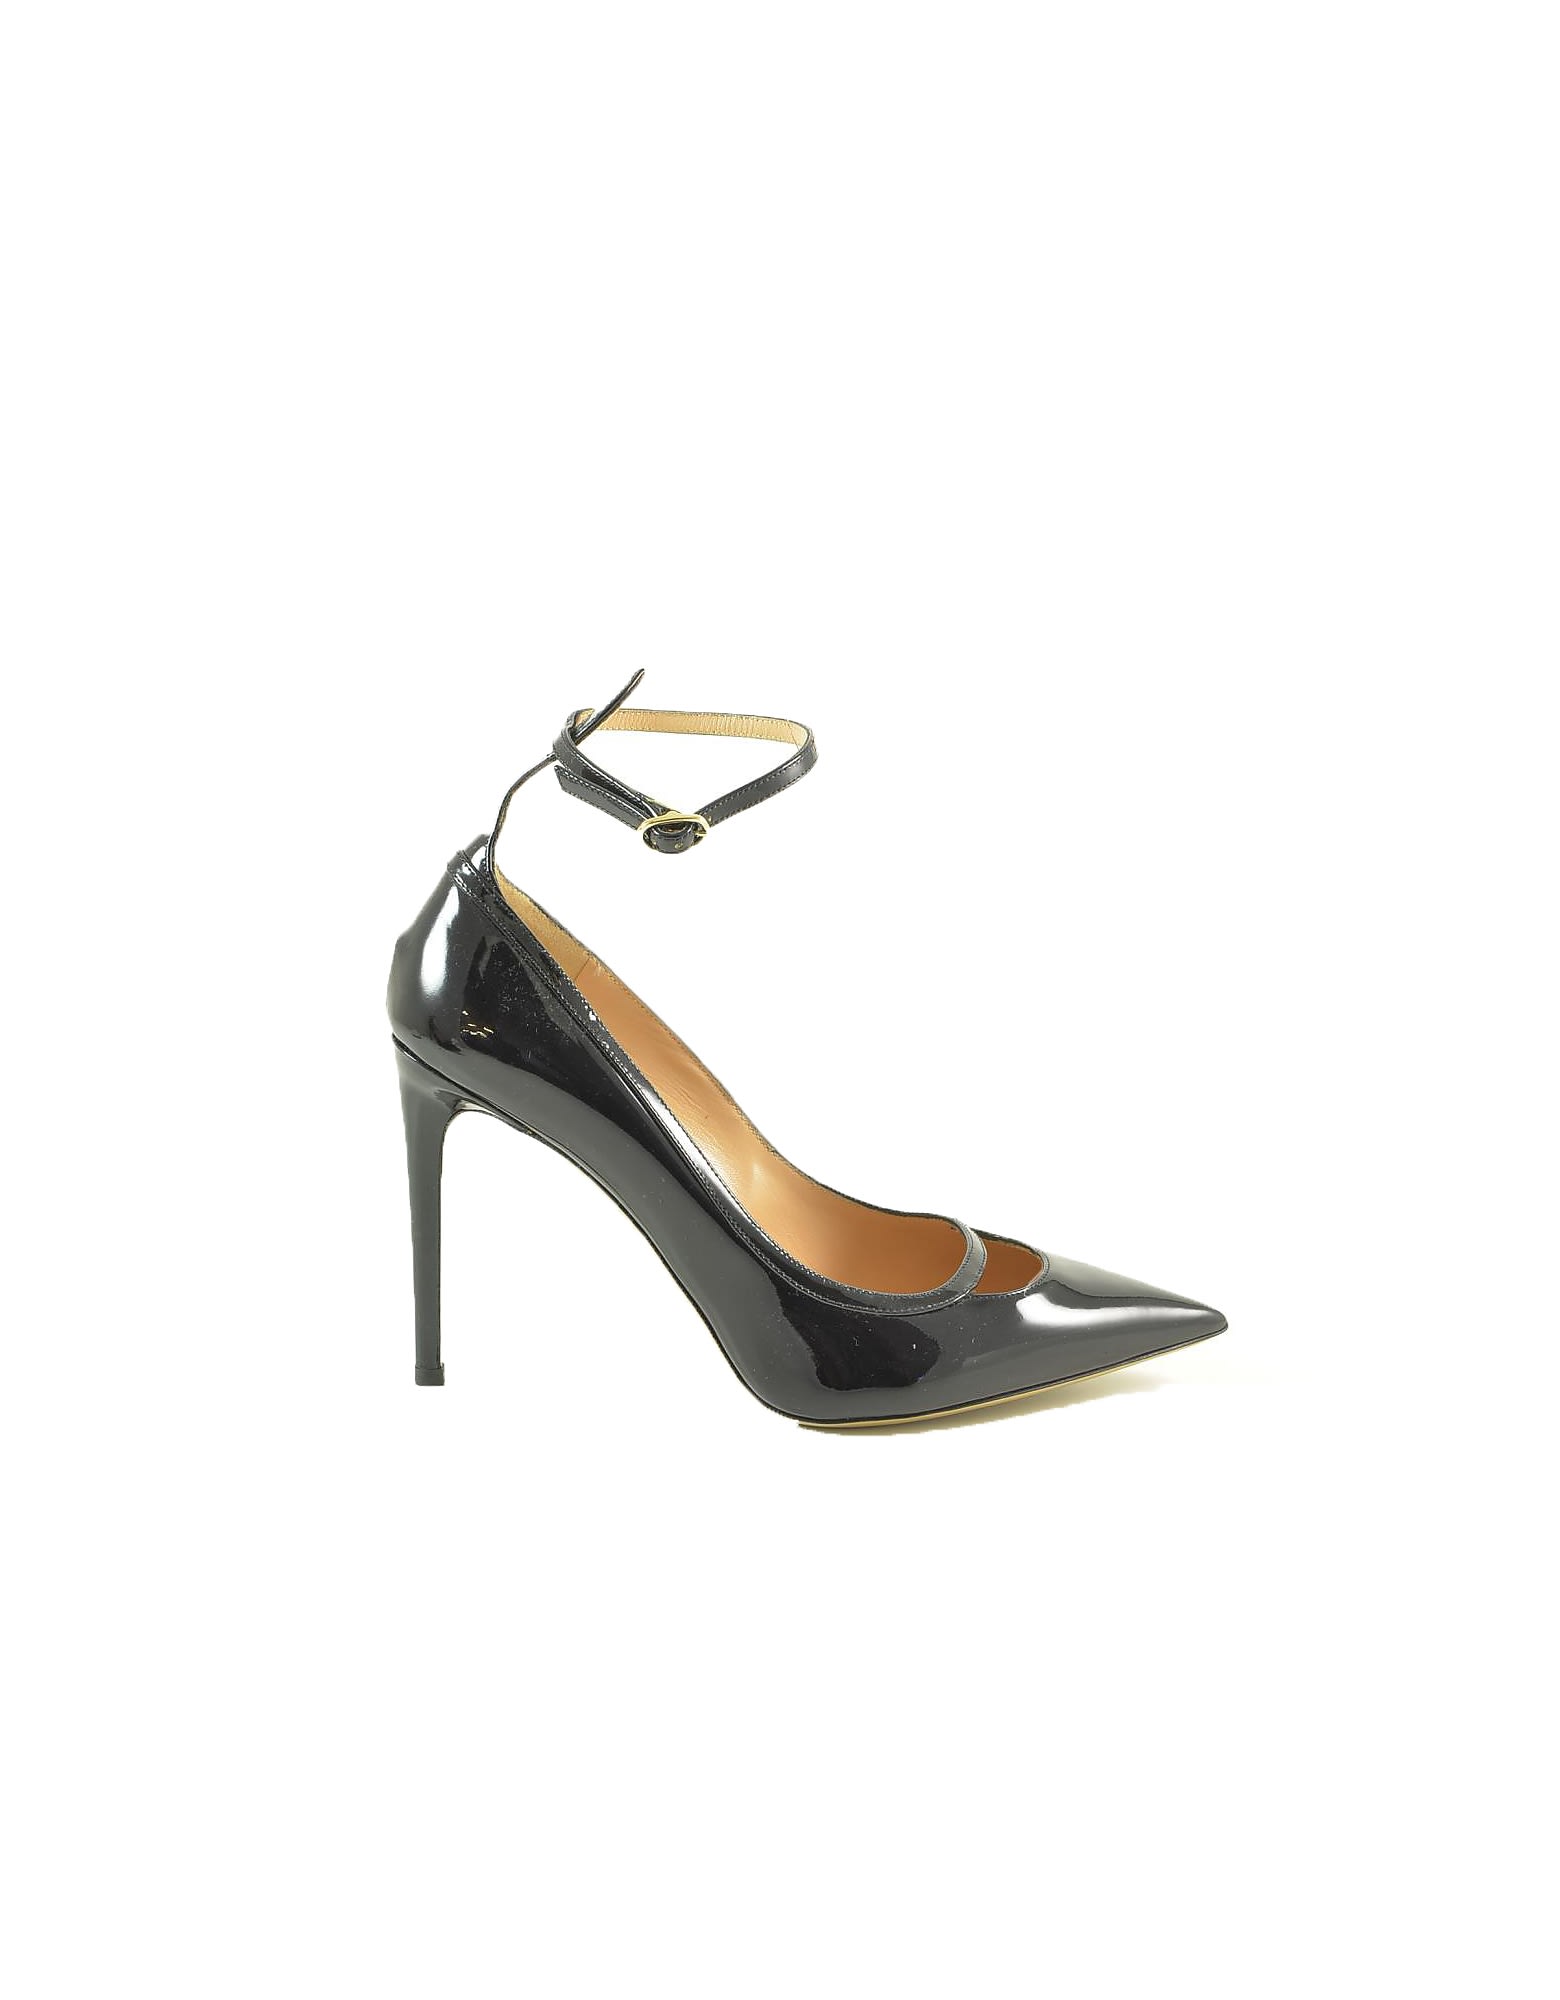 Valentino Black Patent Leather High Heel Pumps W/ankle Wrap